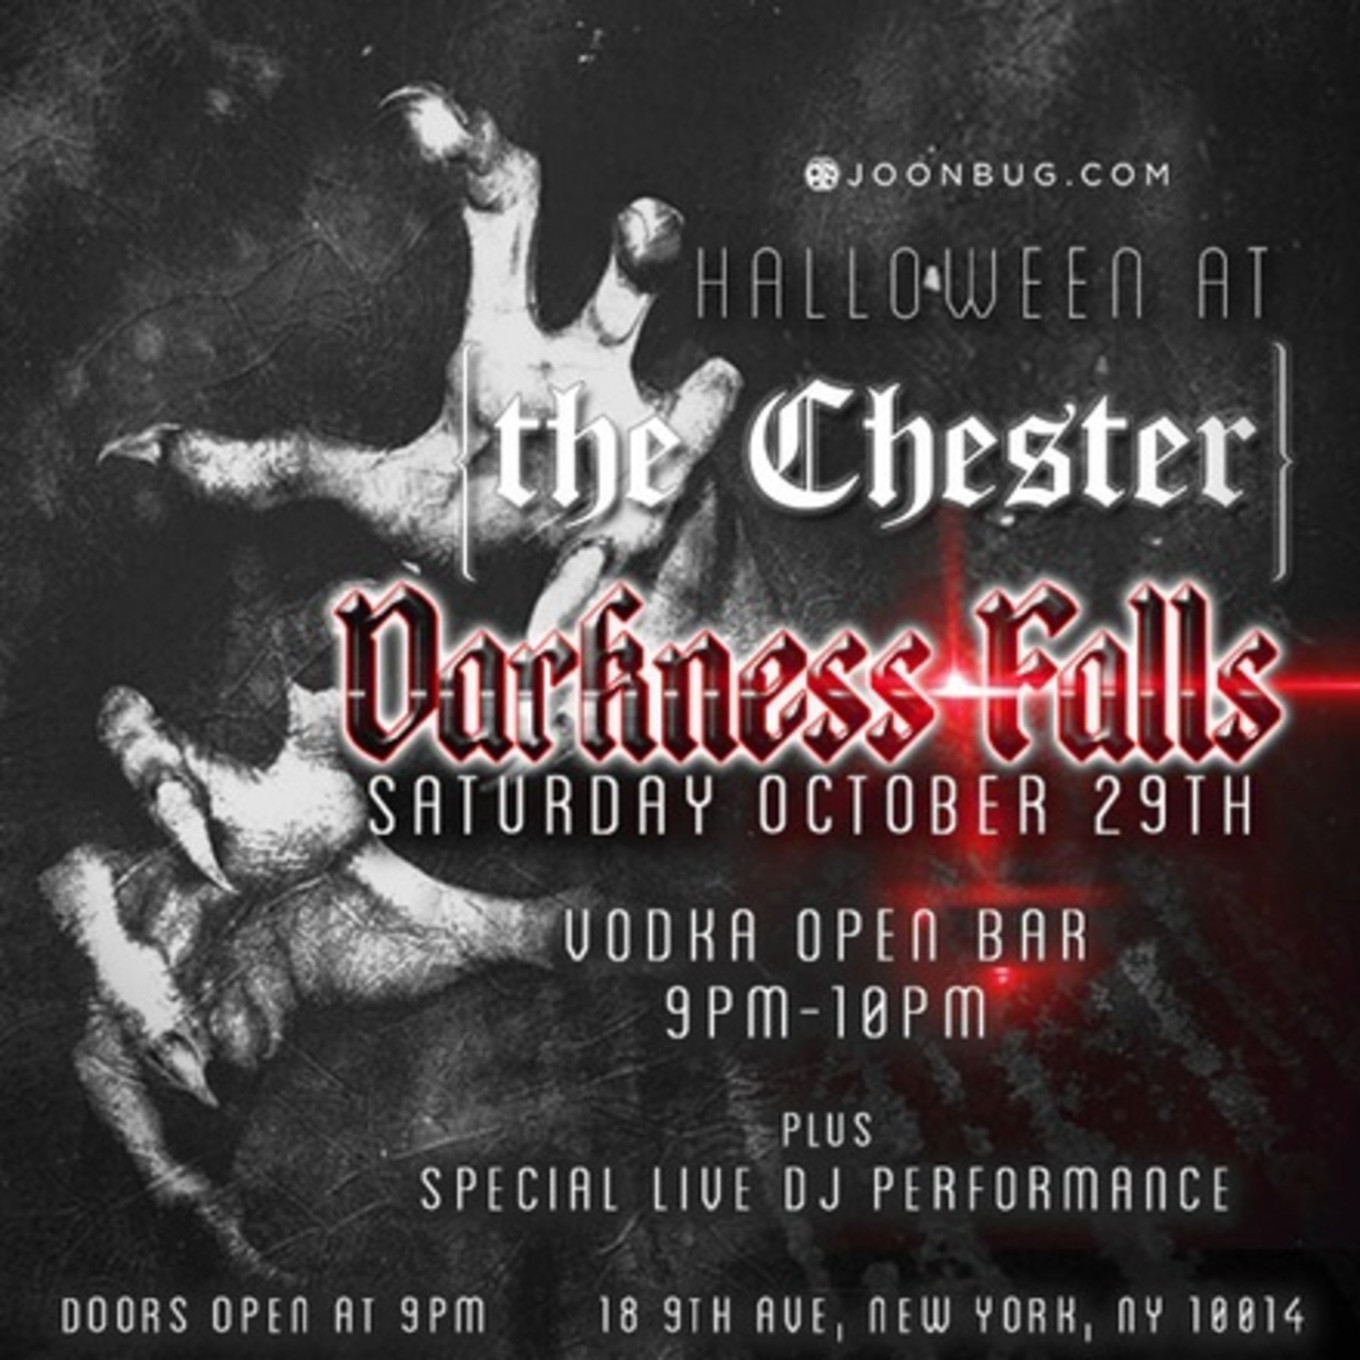 Gansevoort Halloween Party
 The Chester at The Gansevoort Meatpacking Halloween 2016